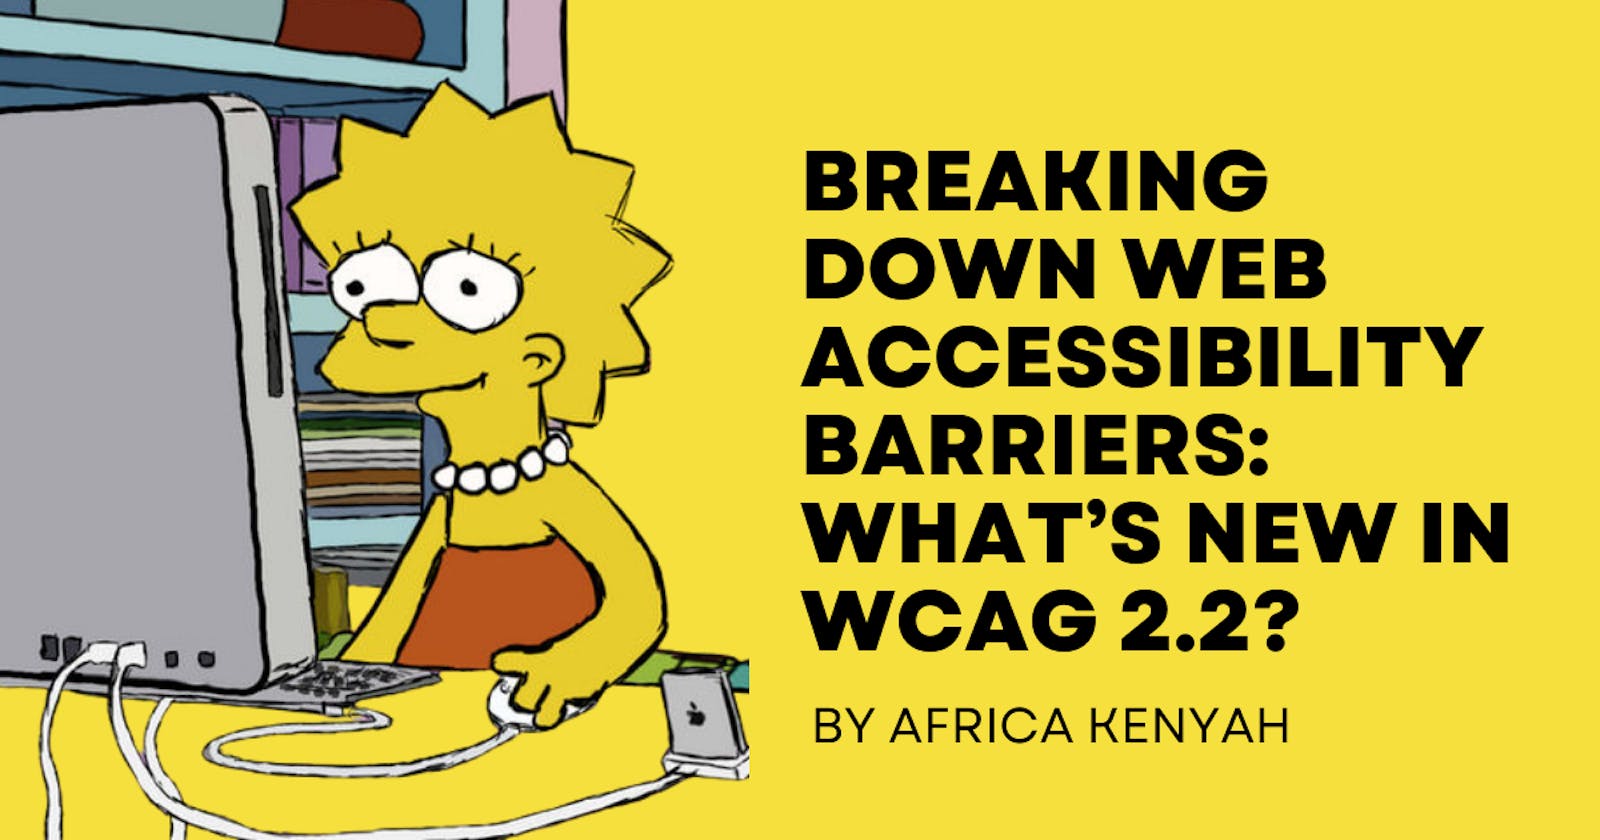 Breaking Down Web Accessibility Barriers: What's New in WCAG 2.2?